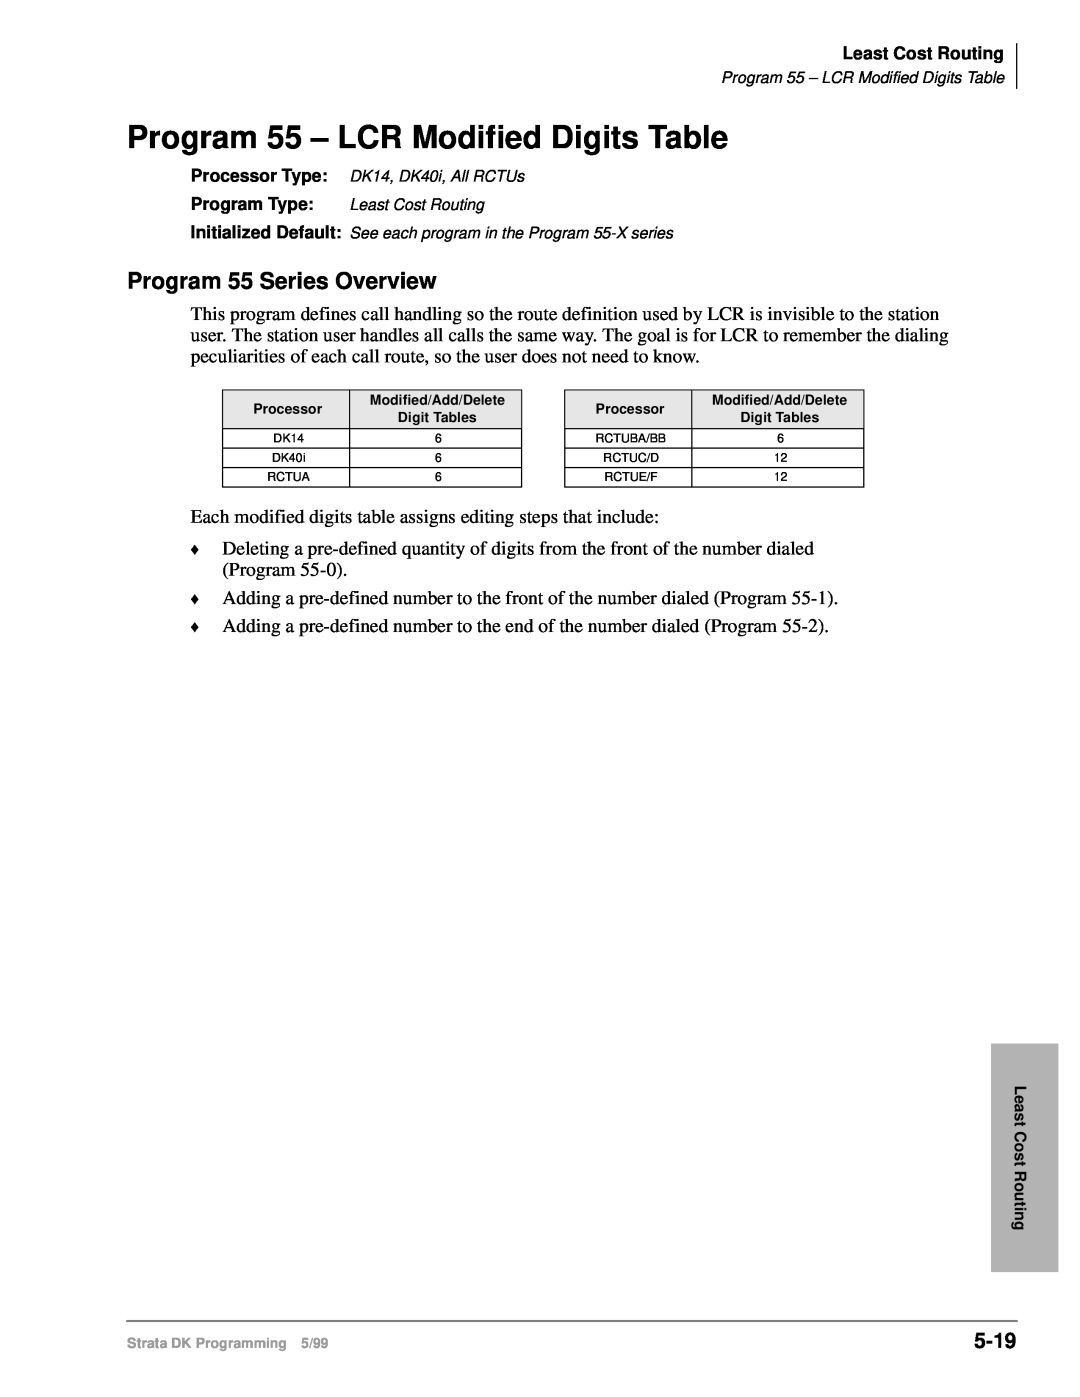 Toshiba dk14 manual Program 55 – LCR Modified Digits Table, Program 55 Series Overview, 5-19 